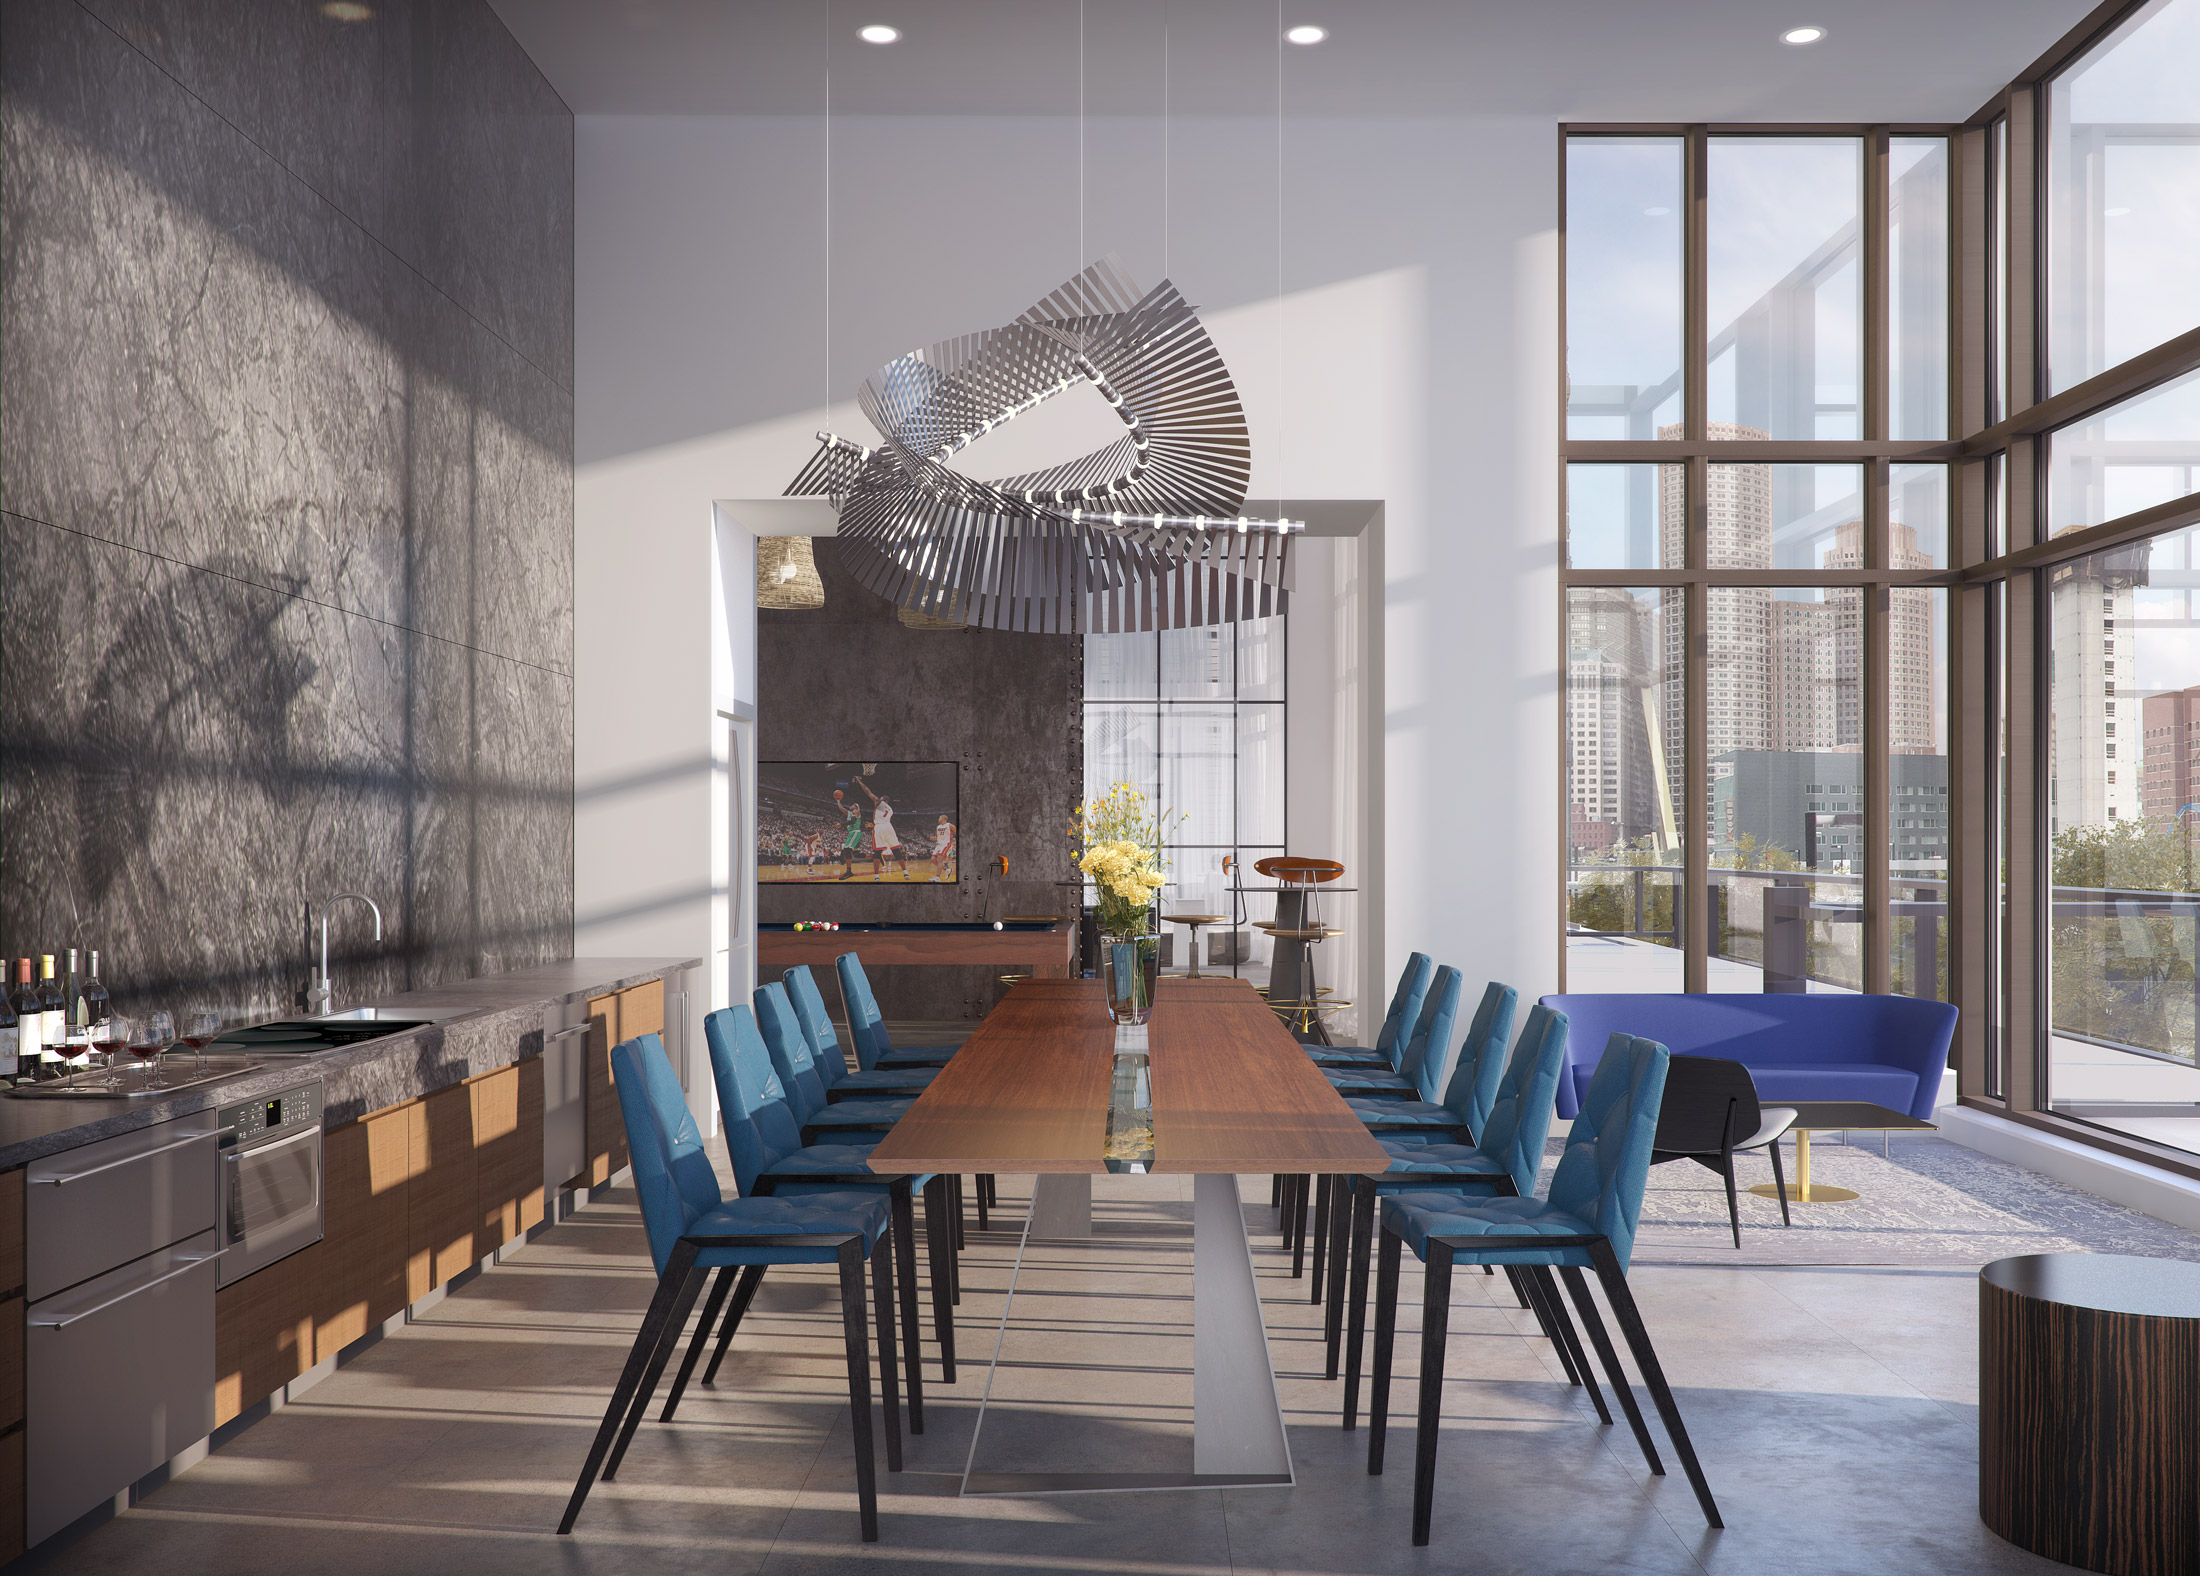 Architectural Rendering of the dining room of the Watermark Seaport project located in Boston, Massachusetts